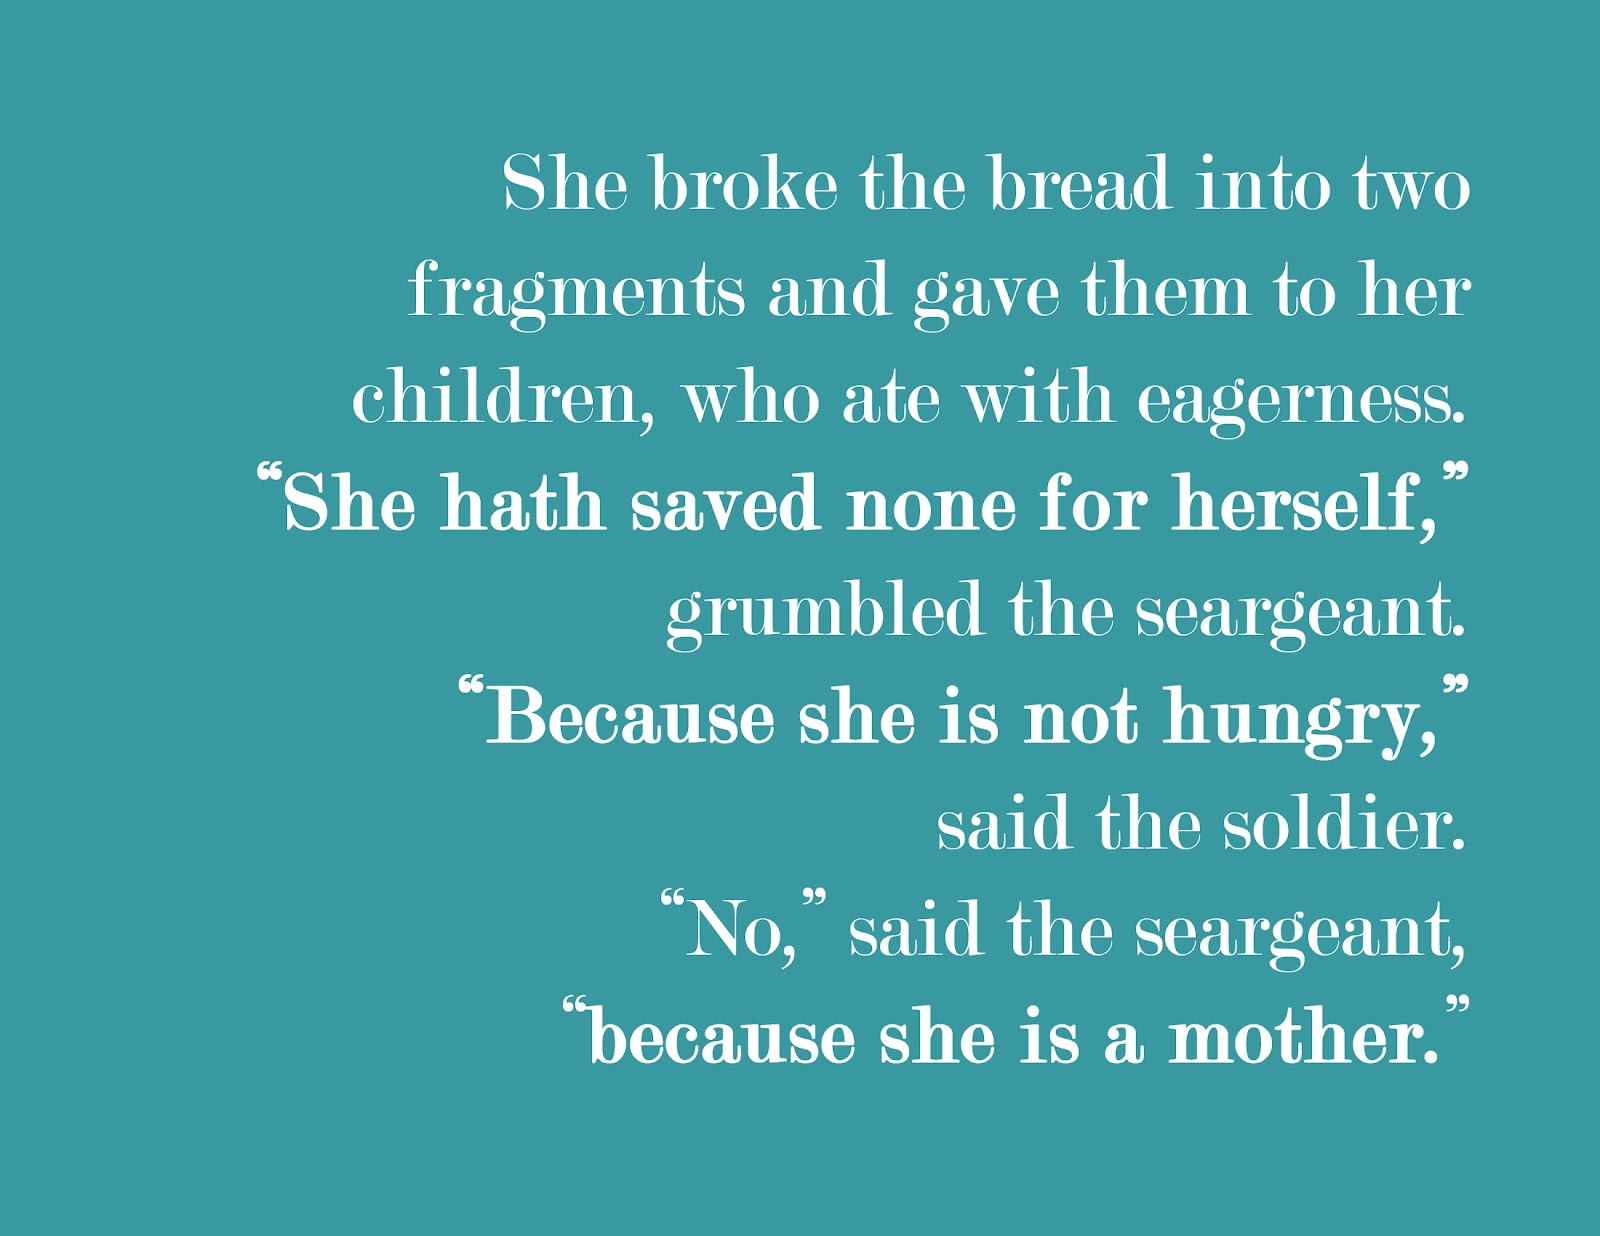 She broke the bread into two fragments and gave them to her children, who ate with eagerness. ‘She hath kept none for herself,’ grumbled the sergeant, because…